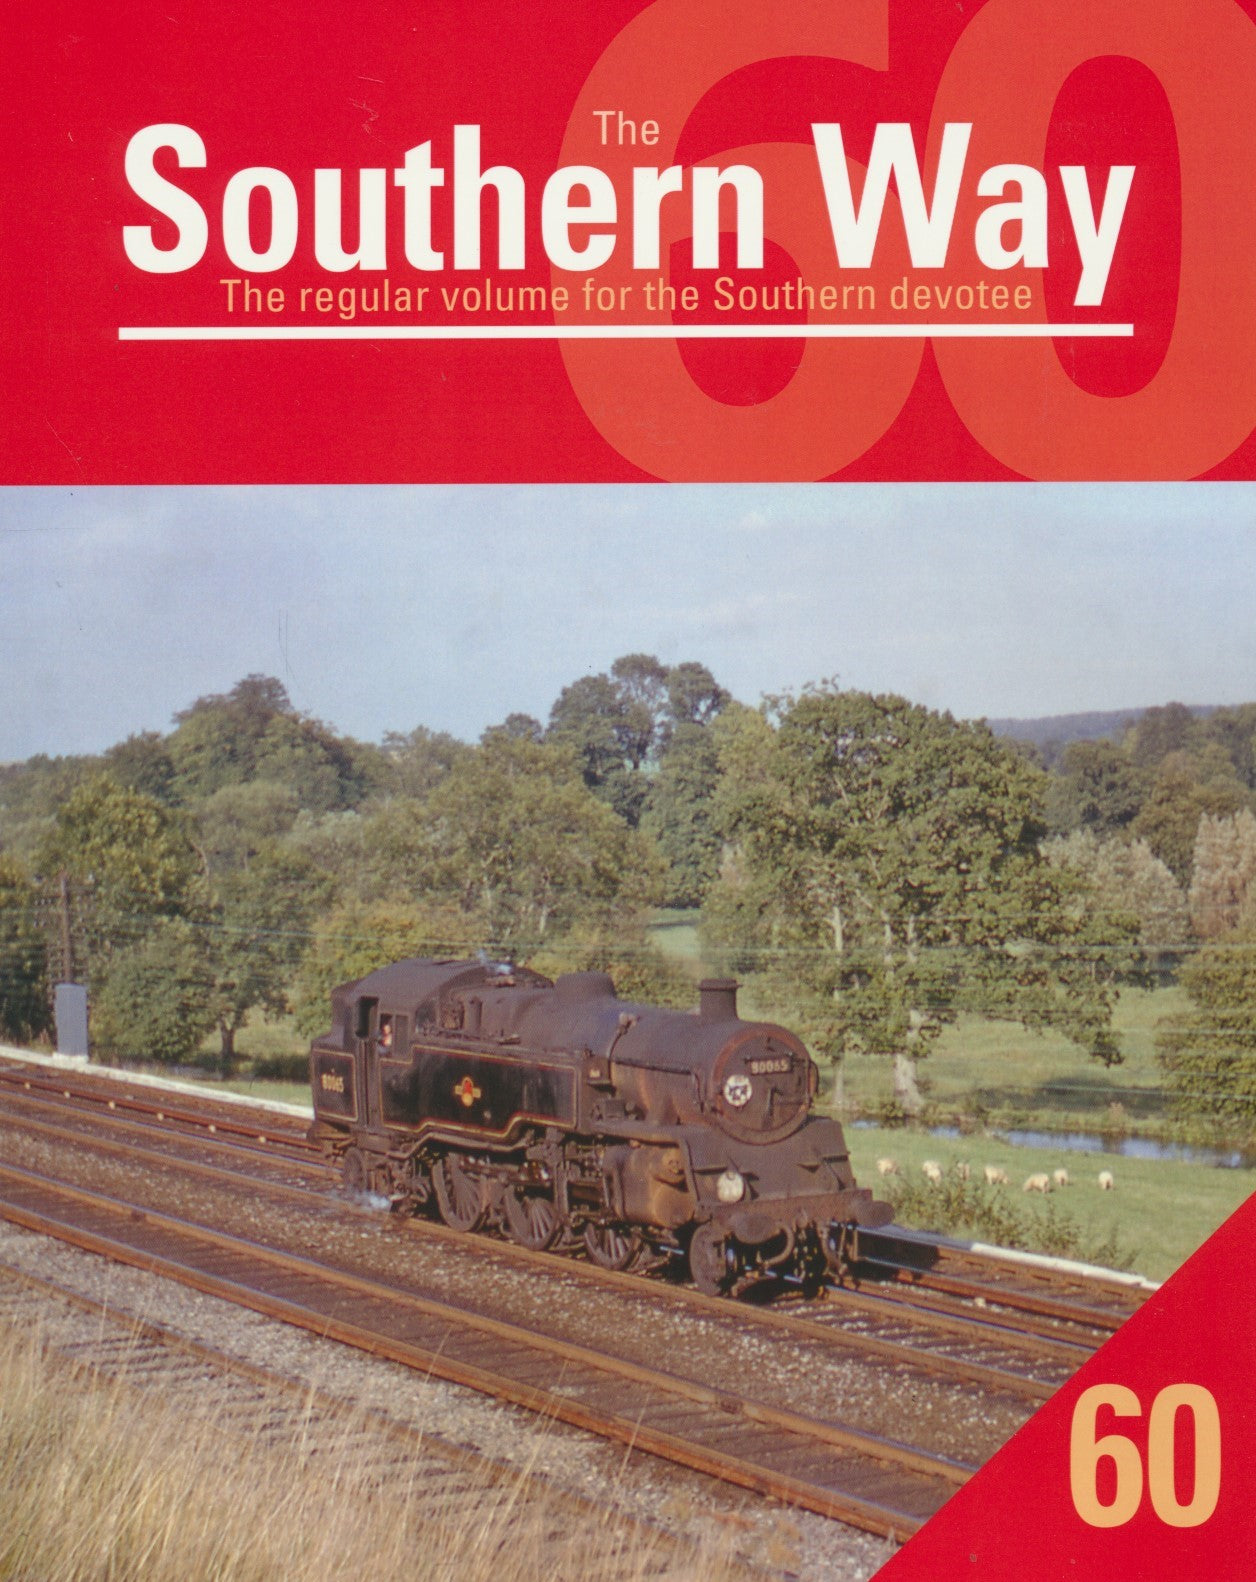 The Southern Way - Issue 60